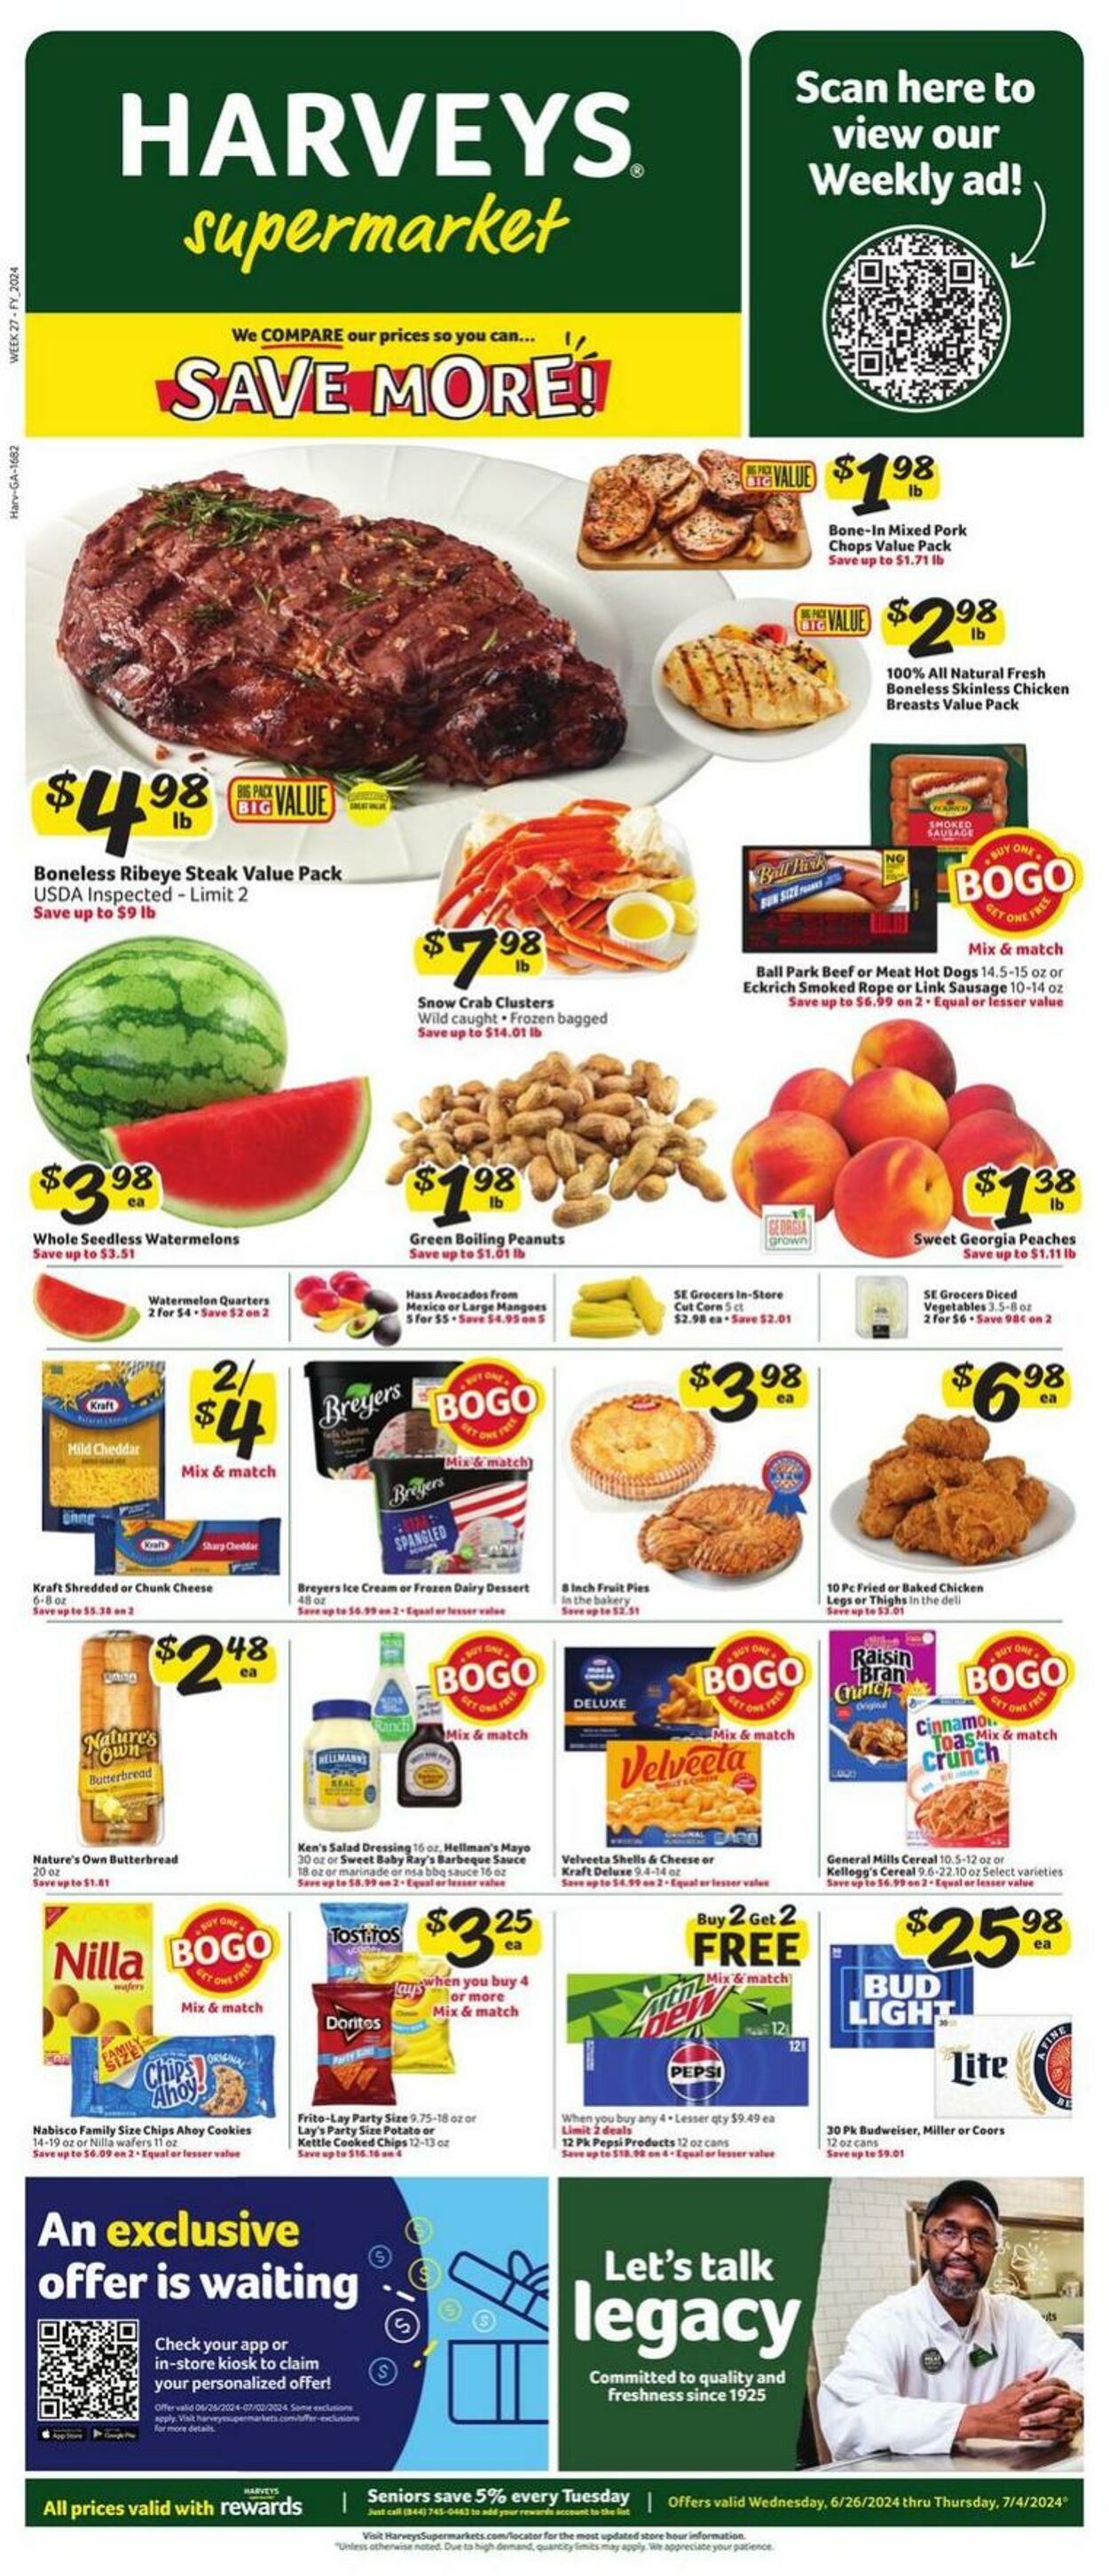 Harvey's Supermarkets Promotional weekly ads